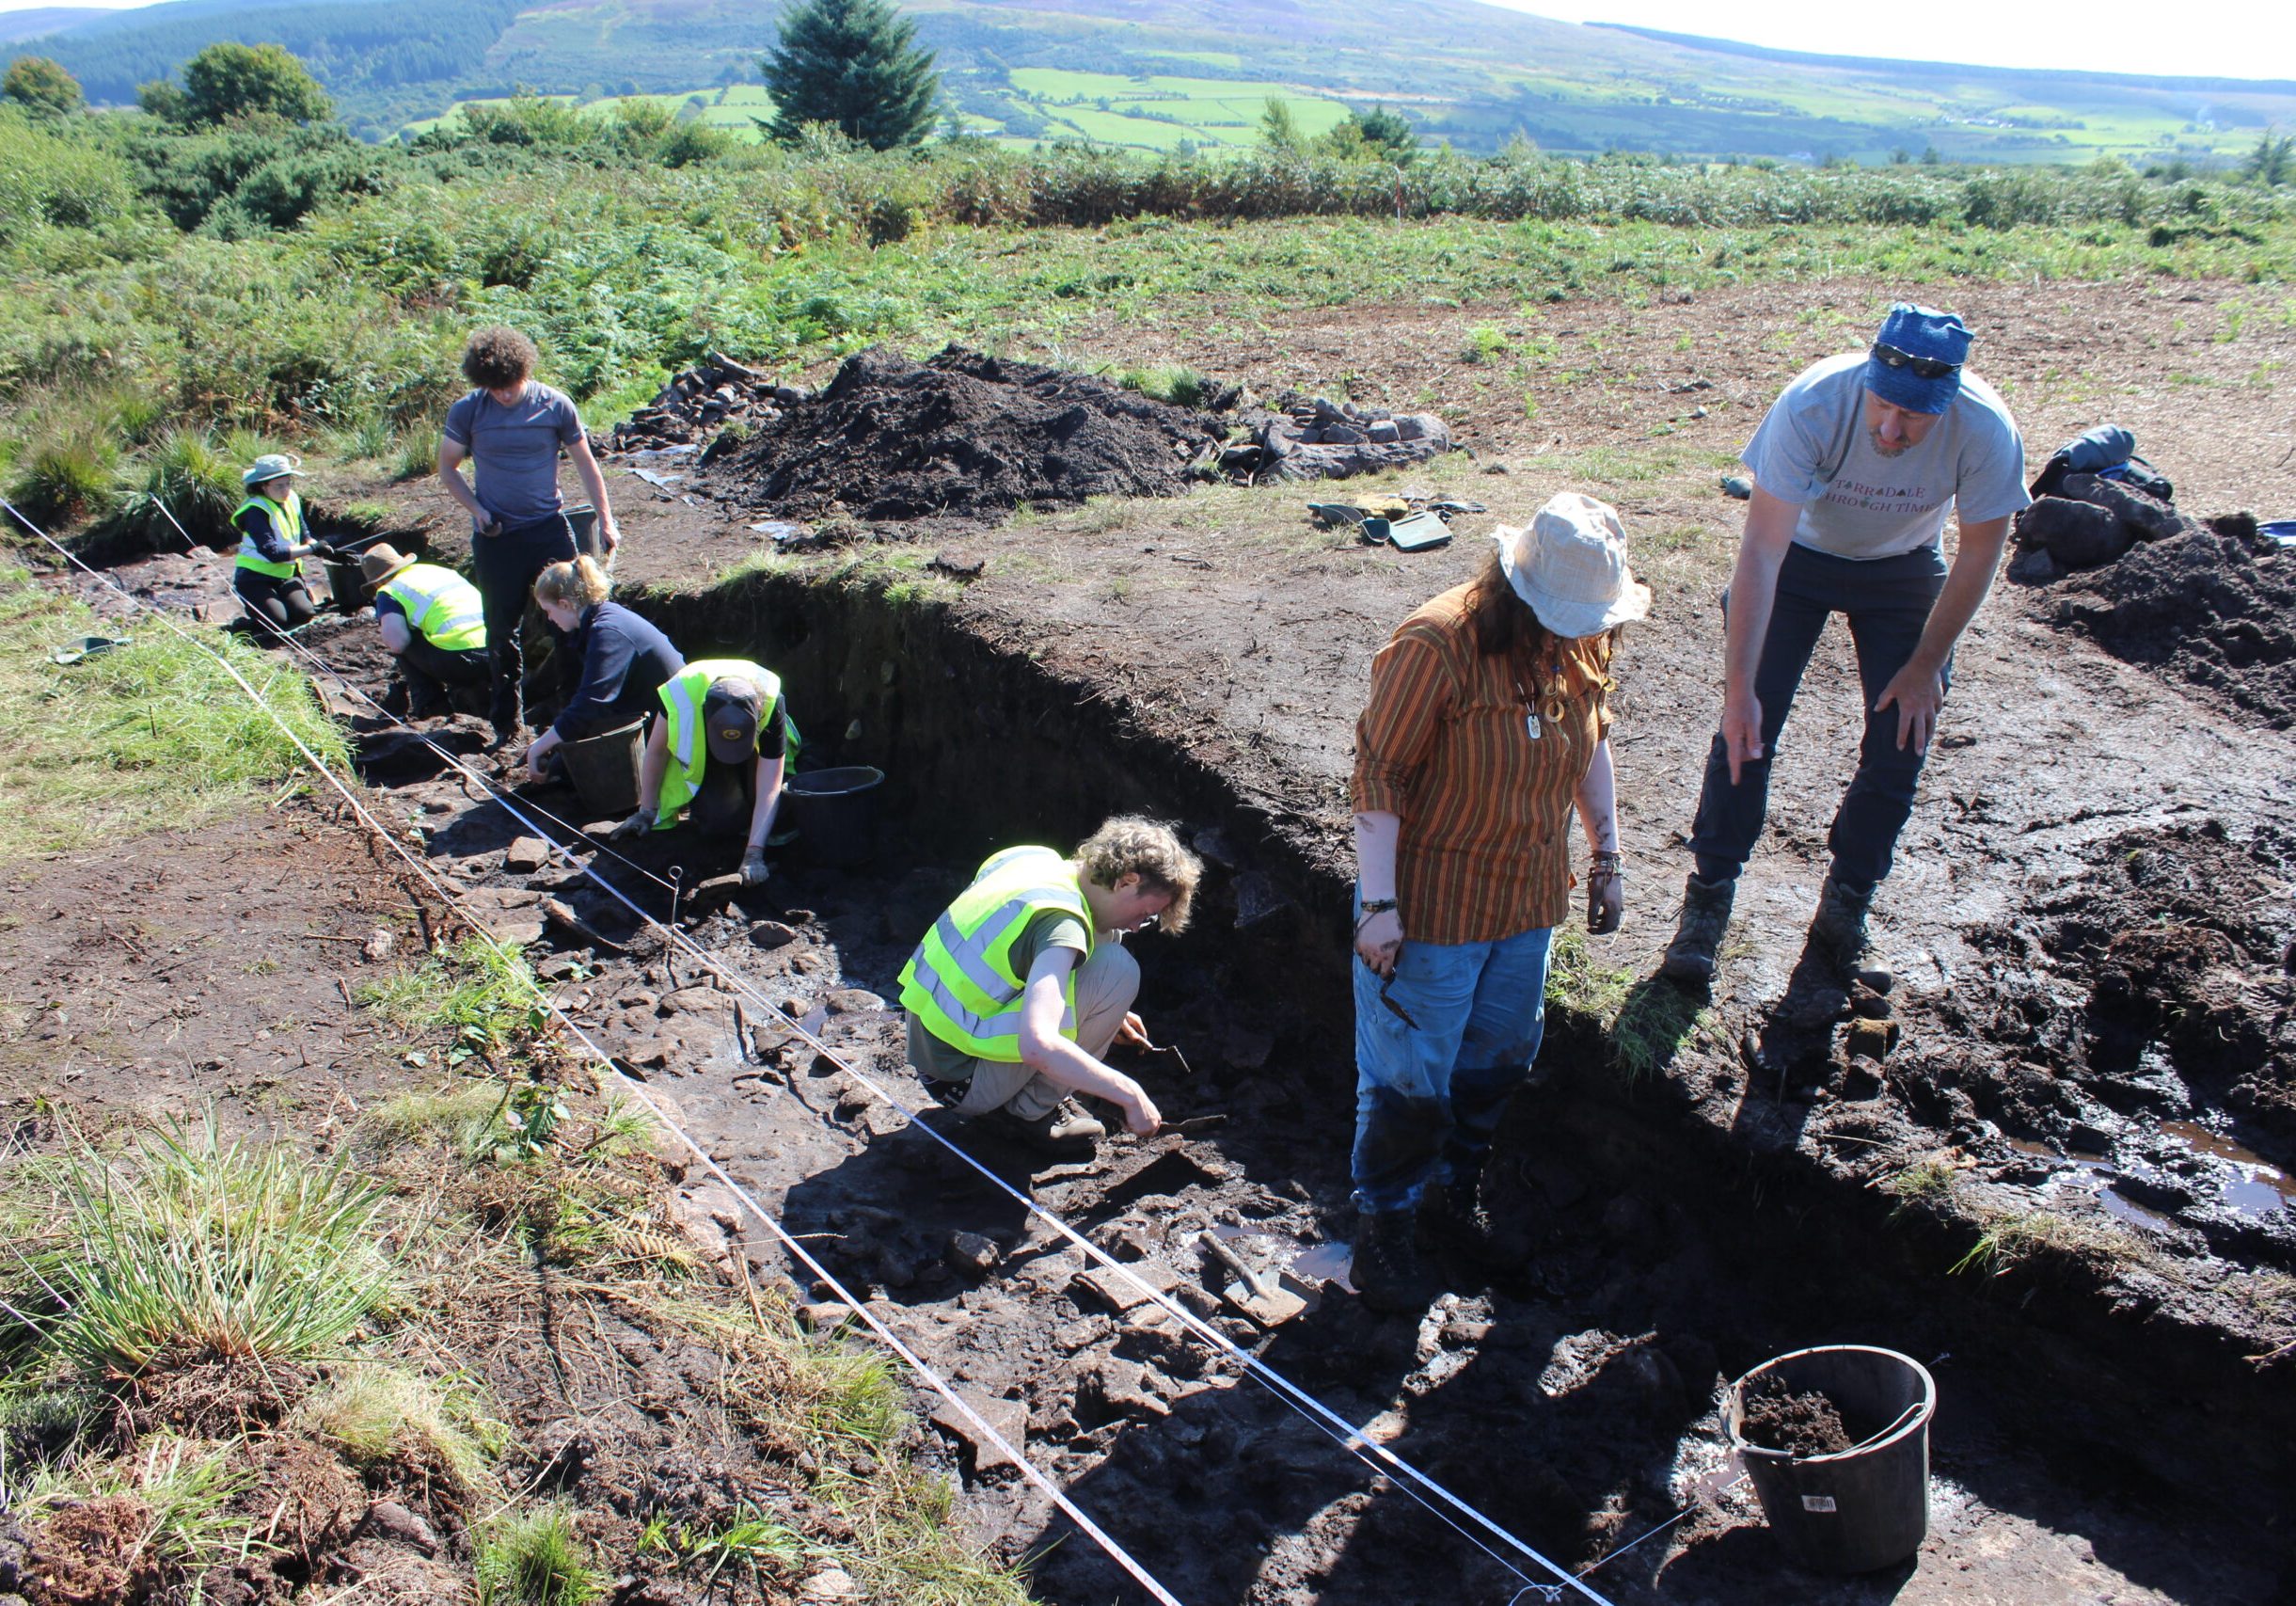 Excavations-through-the-cursus-bank-at-Drumadoon-p5s7p0go-scaled